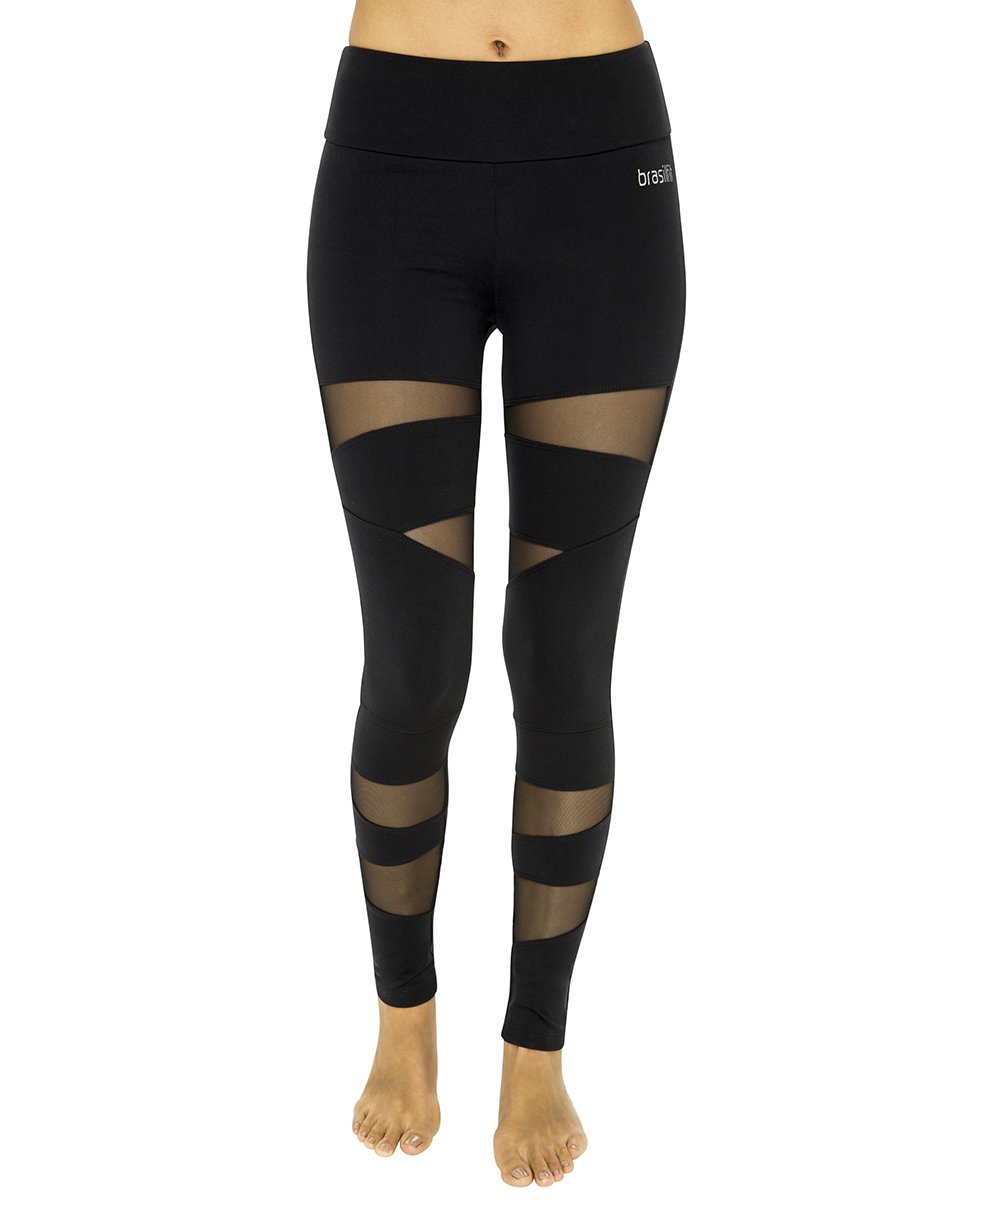 Side view product image for Brasilfit Osaka full length activewear leggings. Osaka leggings are made from our premium Supplex fabric and contain mesh inserts. Osaka leggings are part of our essentials and basics activewear collection that is focused on high compression, performance activewear.